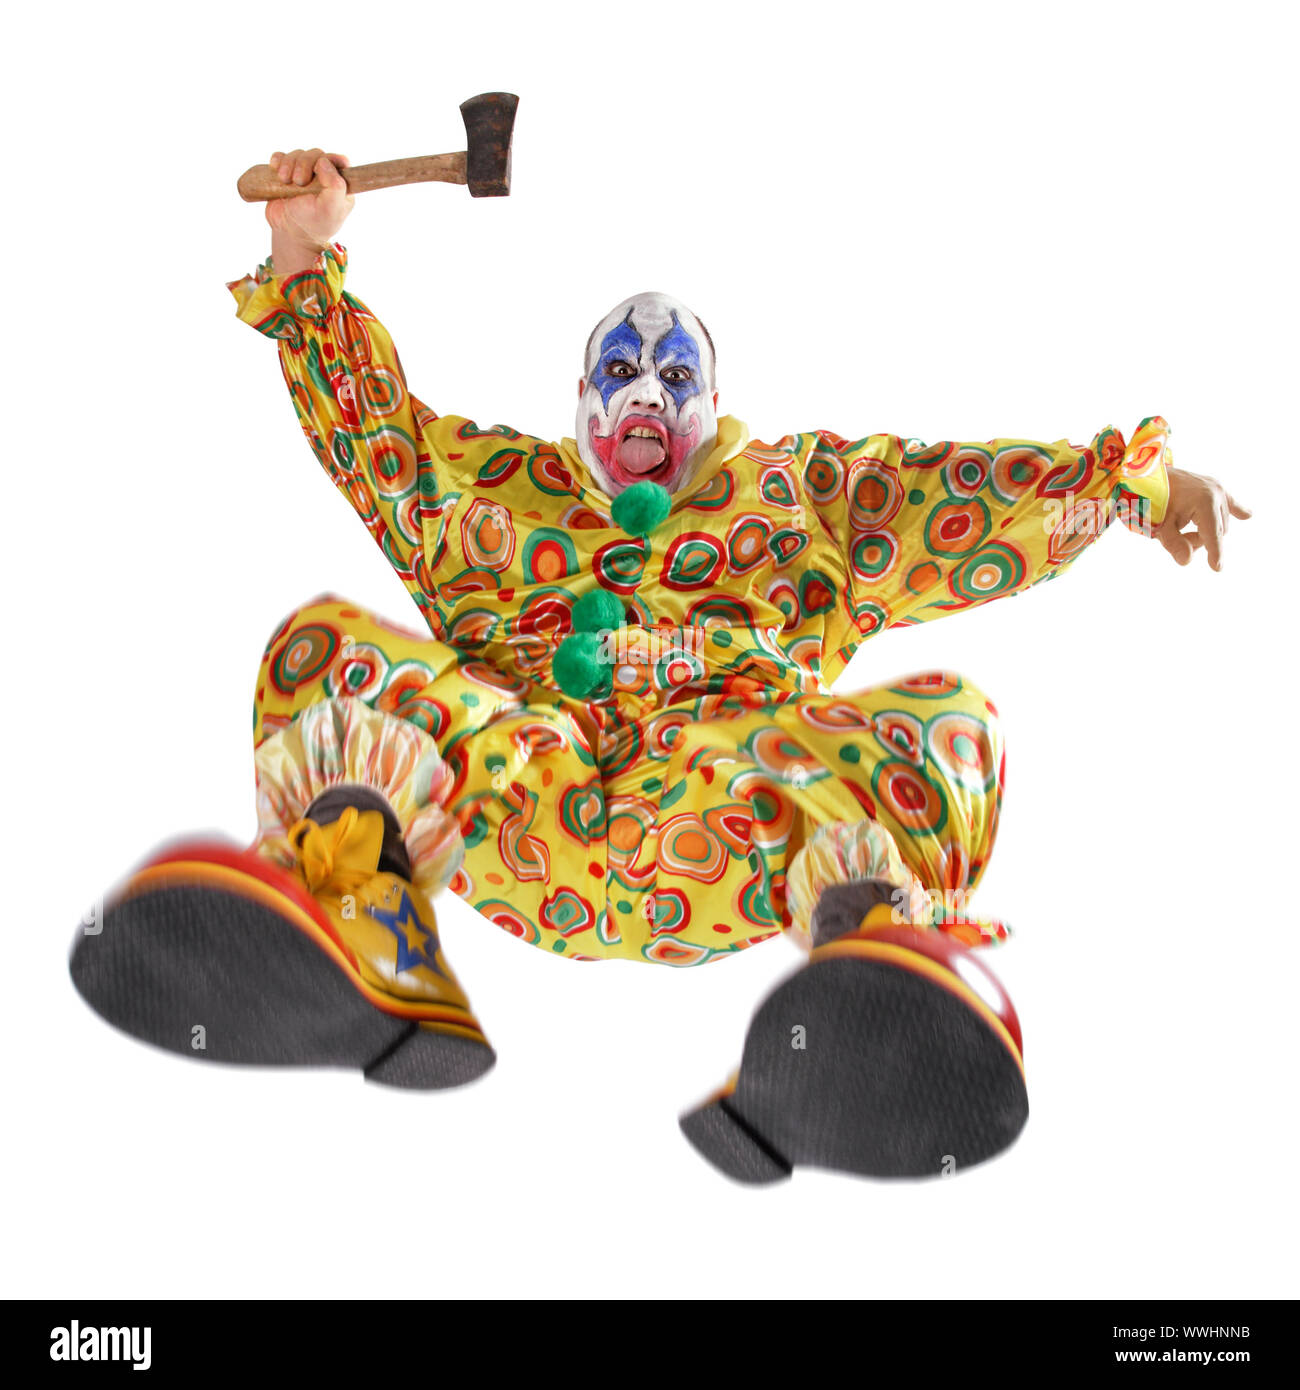 A nasty evil clown, angry, jumping, and about to hack you to bits.  Motion blur on the knees and shoes. Stock Photo